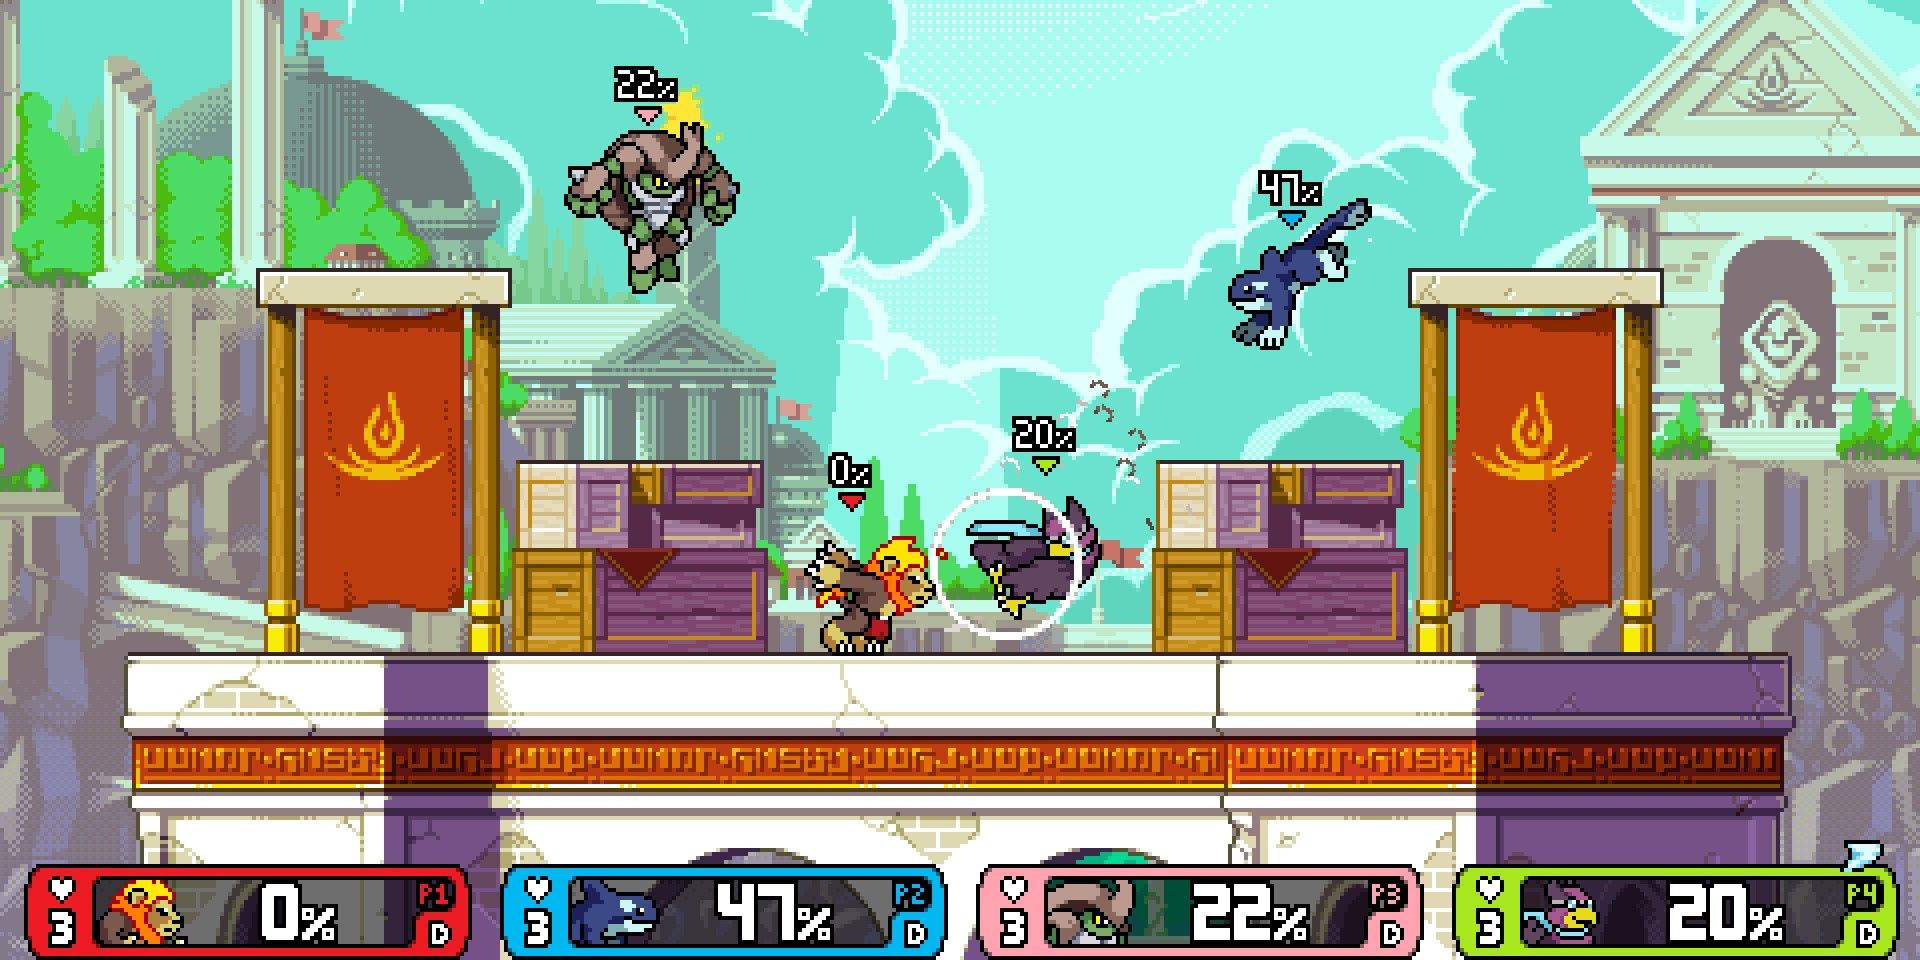 Four fighters facing off in Rivals of Aether